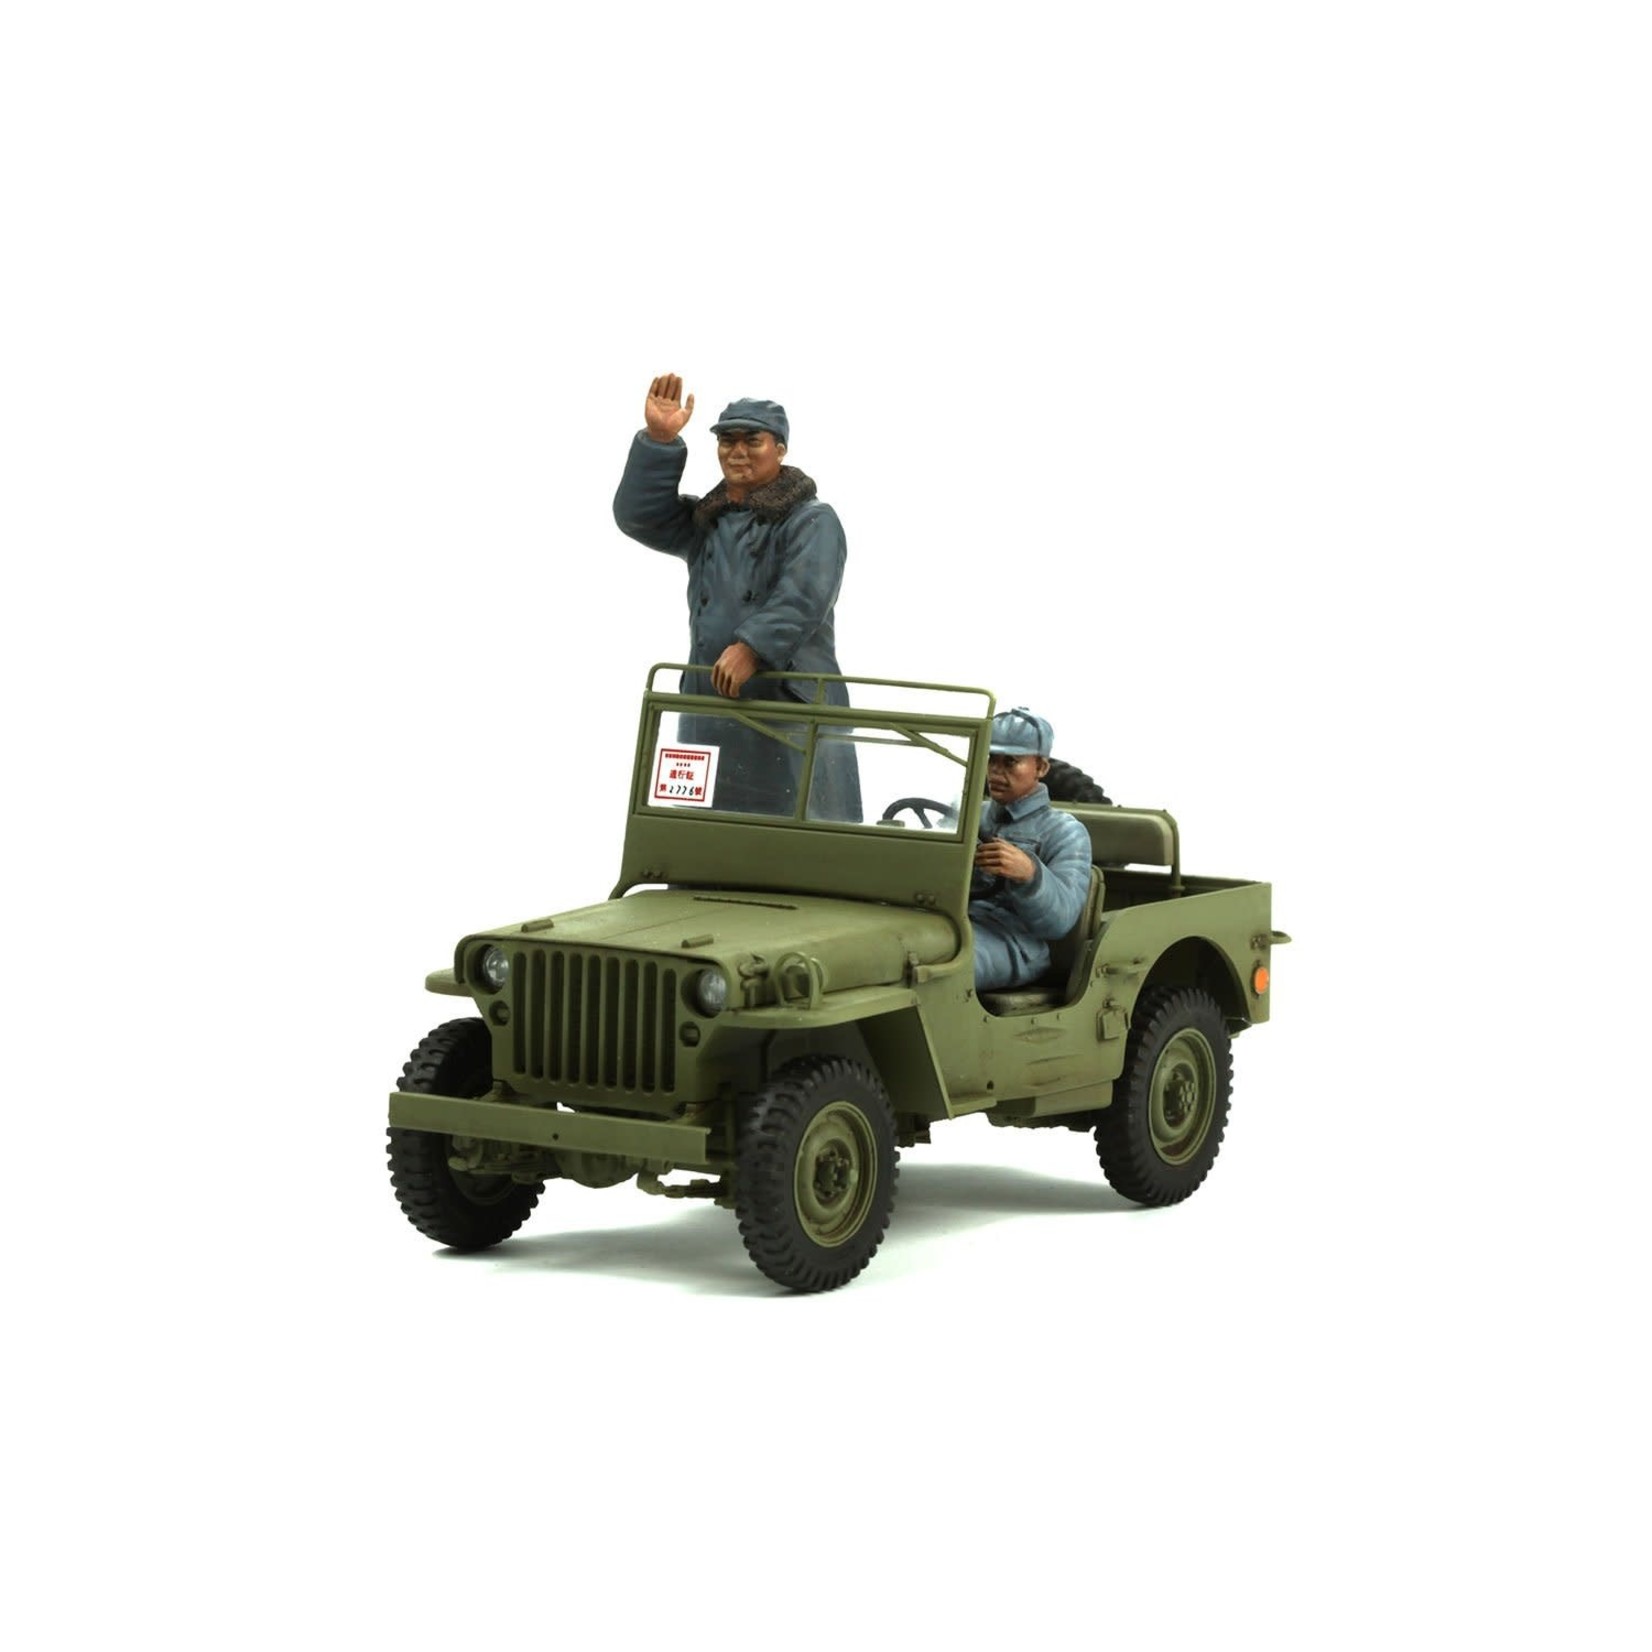 MENG MENGVS013 MB Military Vehicle New China 1949 with 2 Resin Figures (1/35)